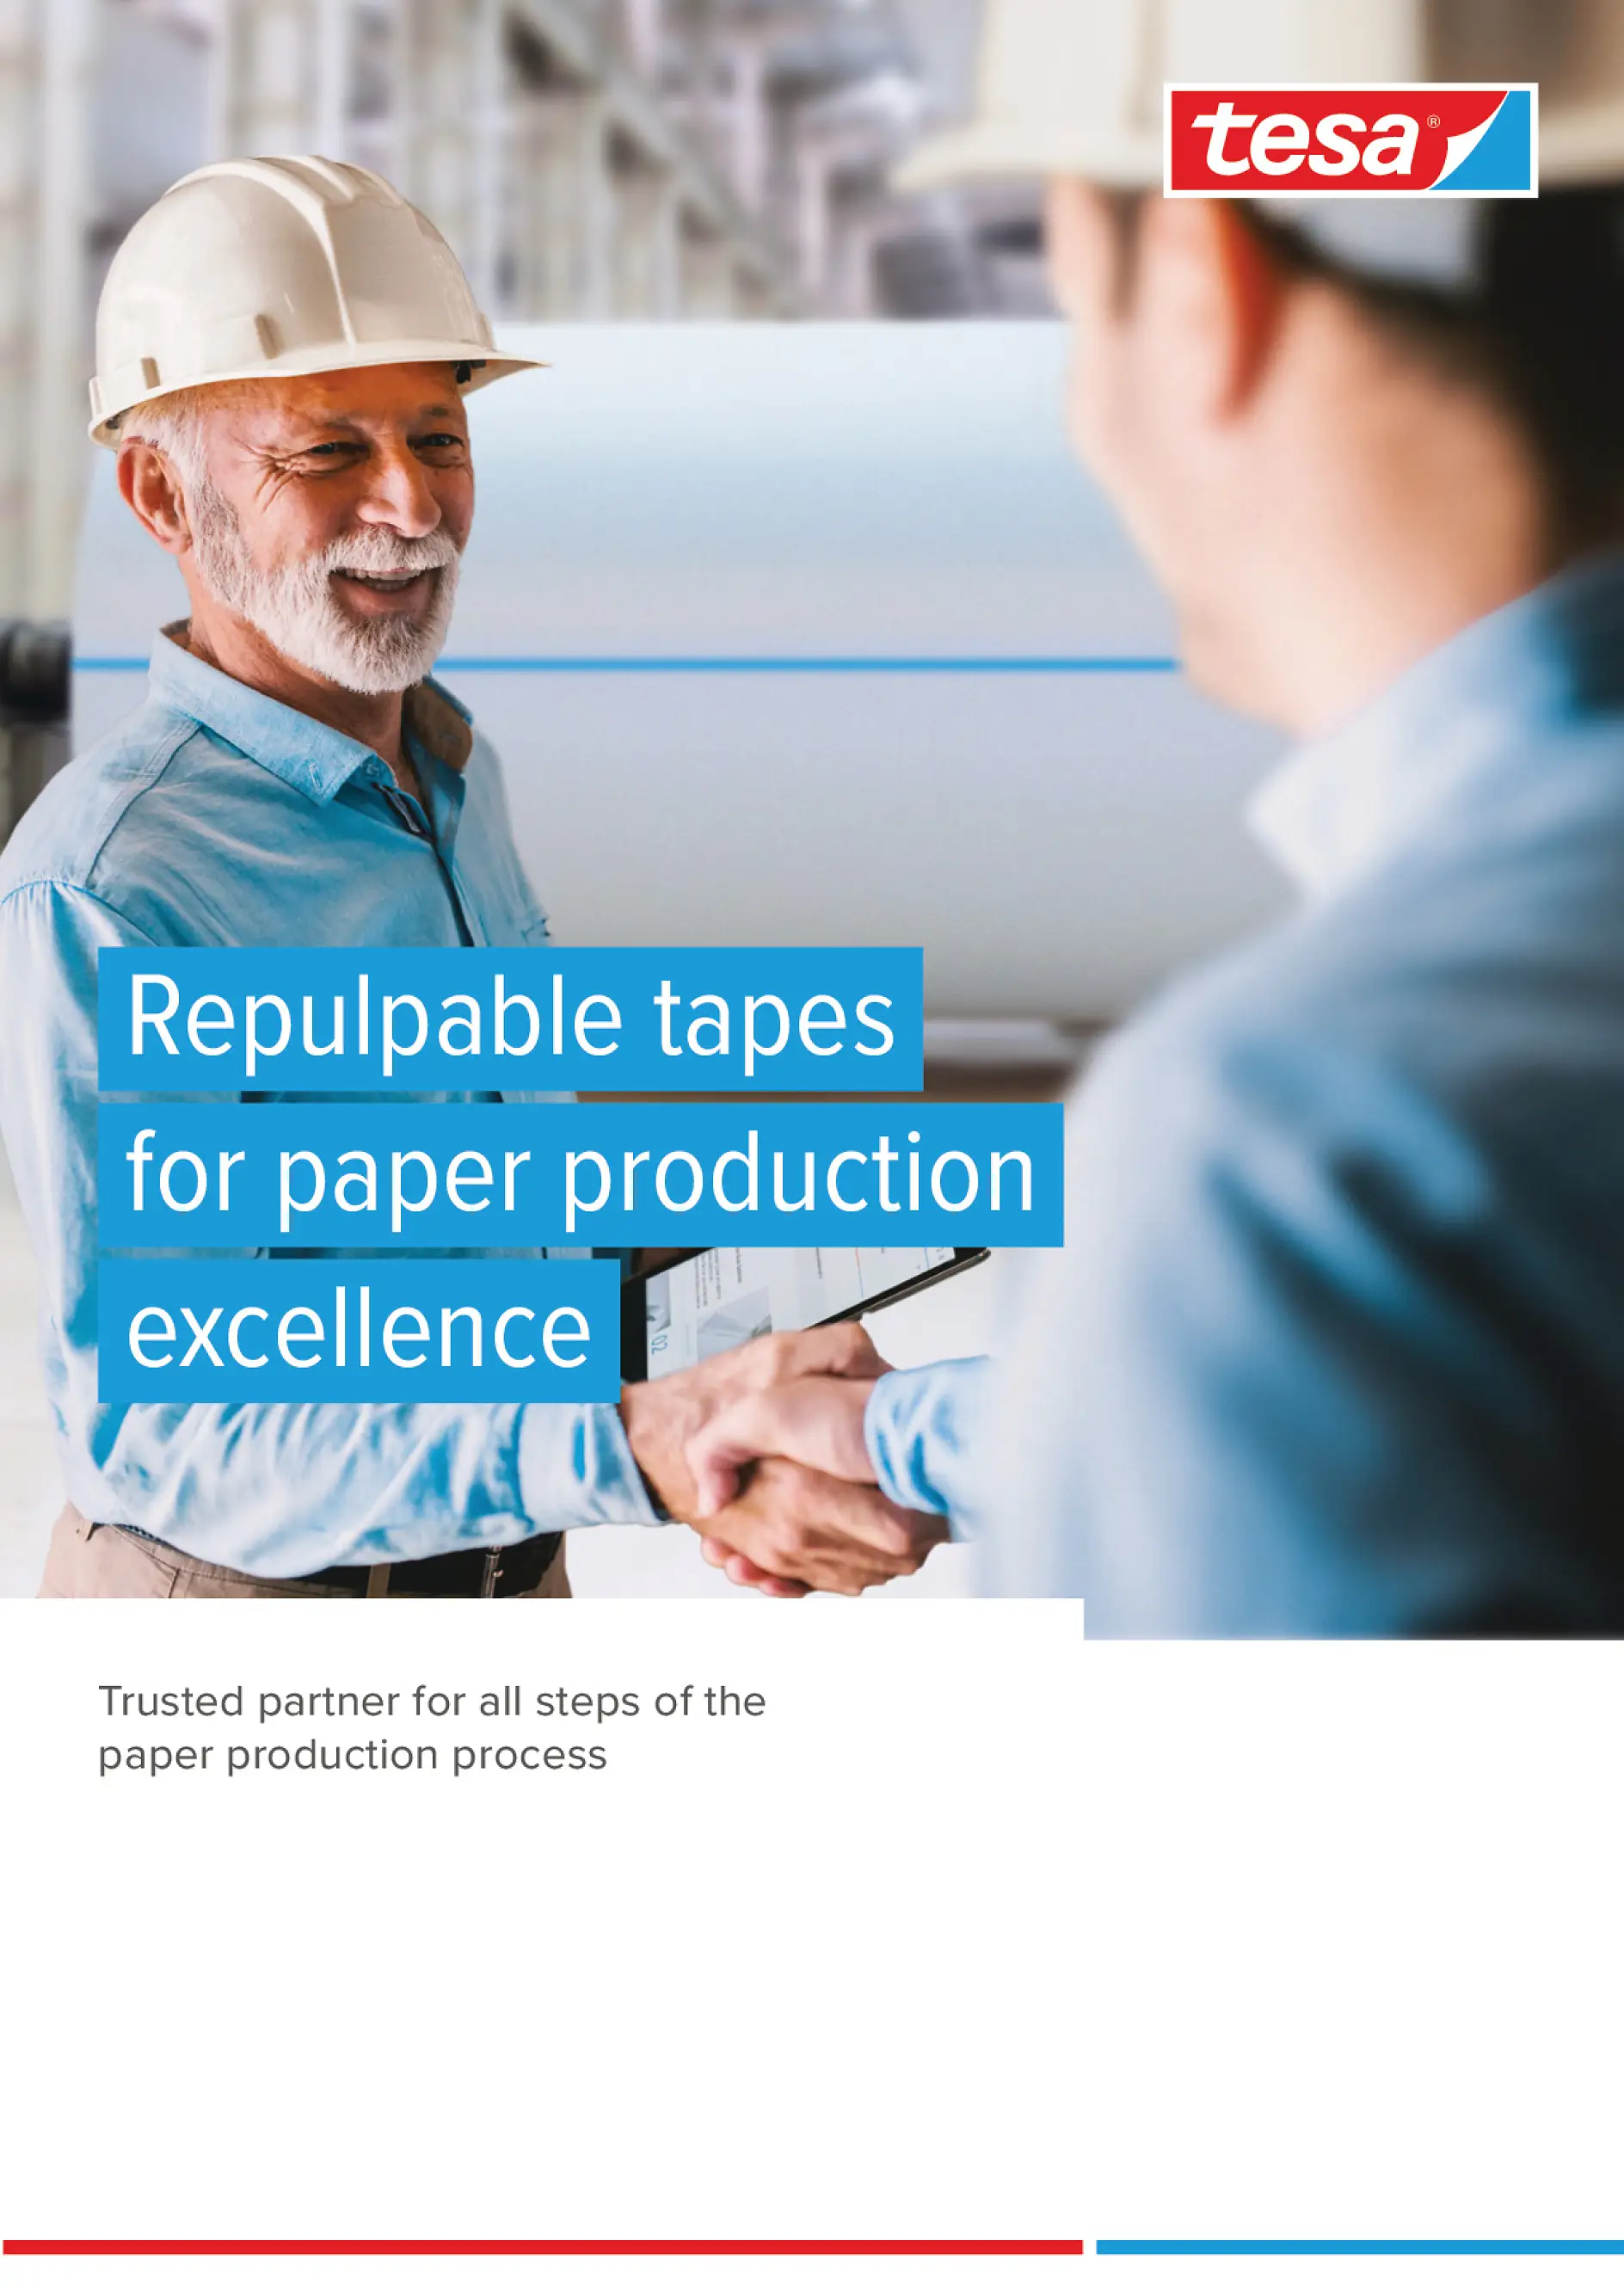 Repulpable tapes for paper production excellence